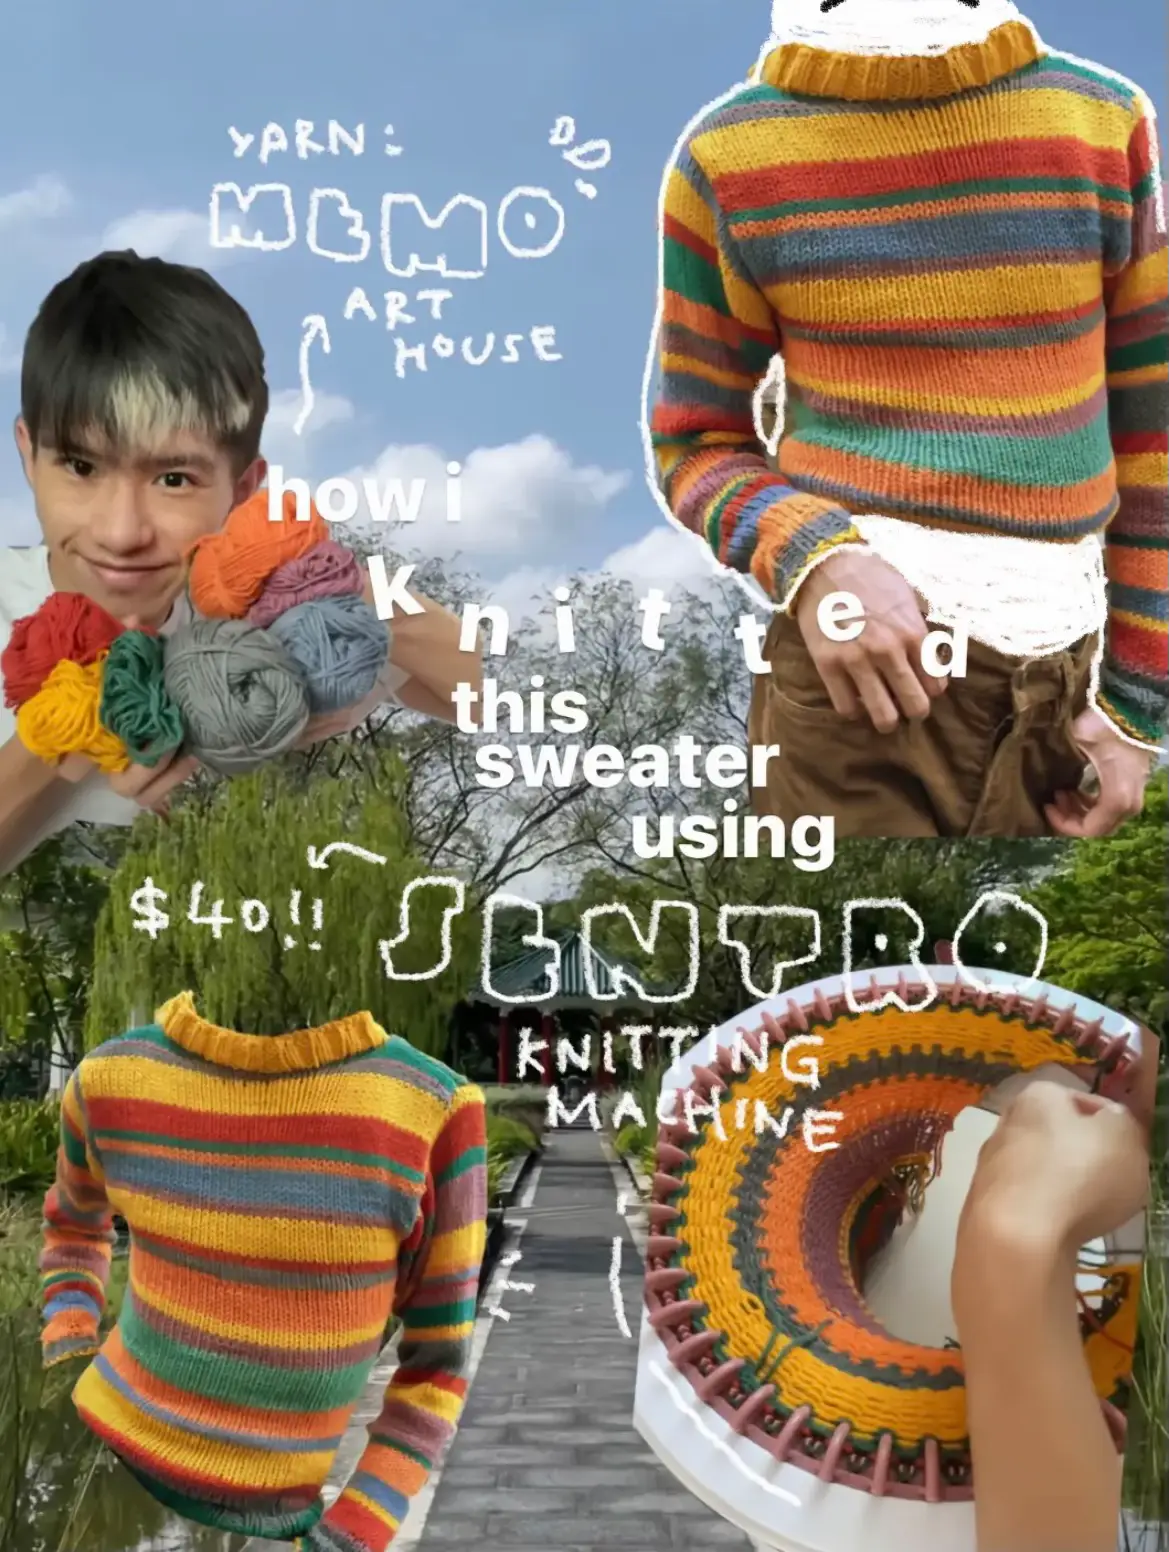 i knitted this sweater with the sentro machine!🧶